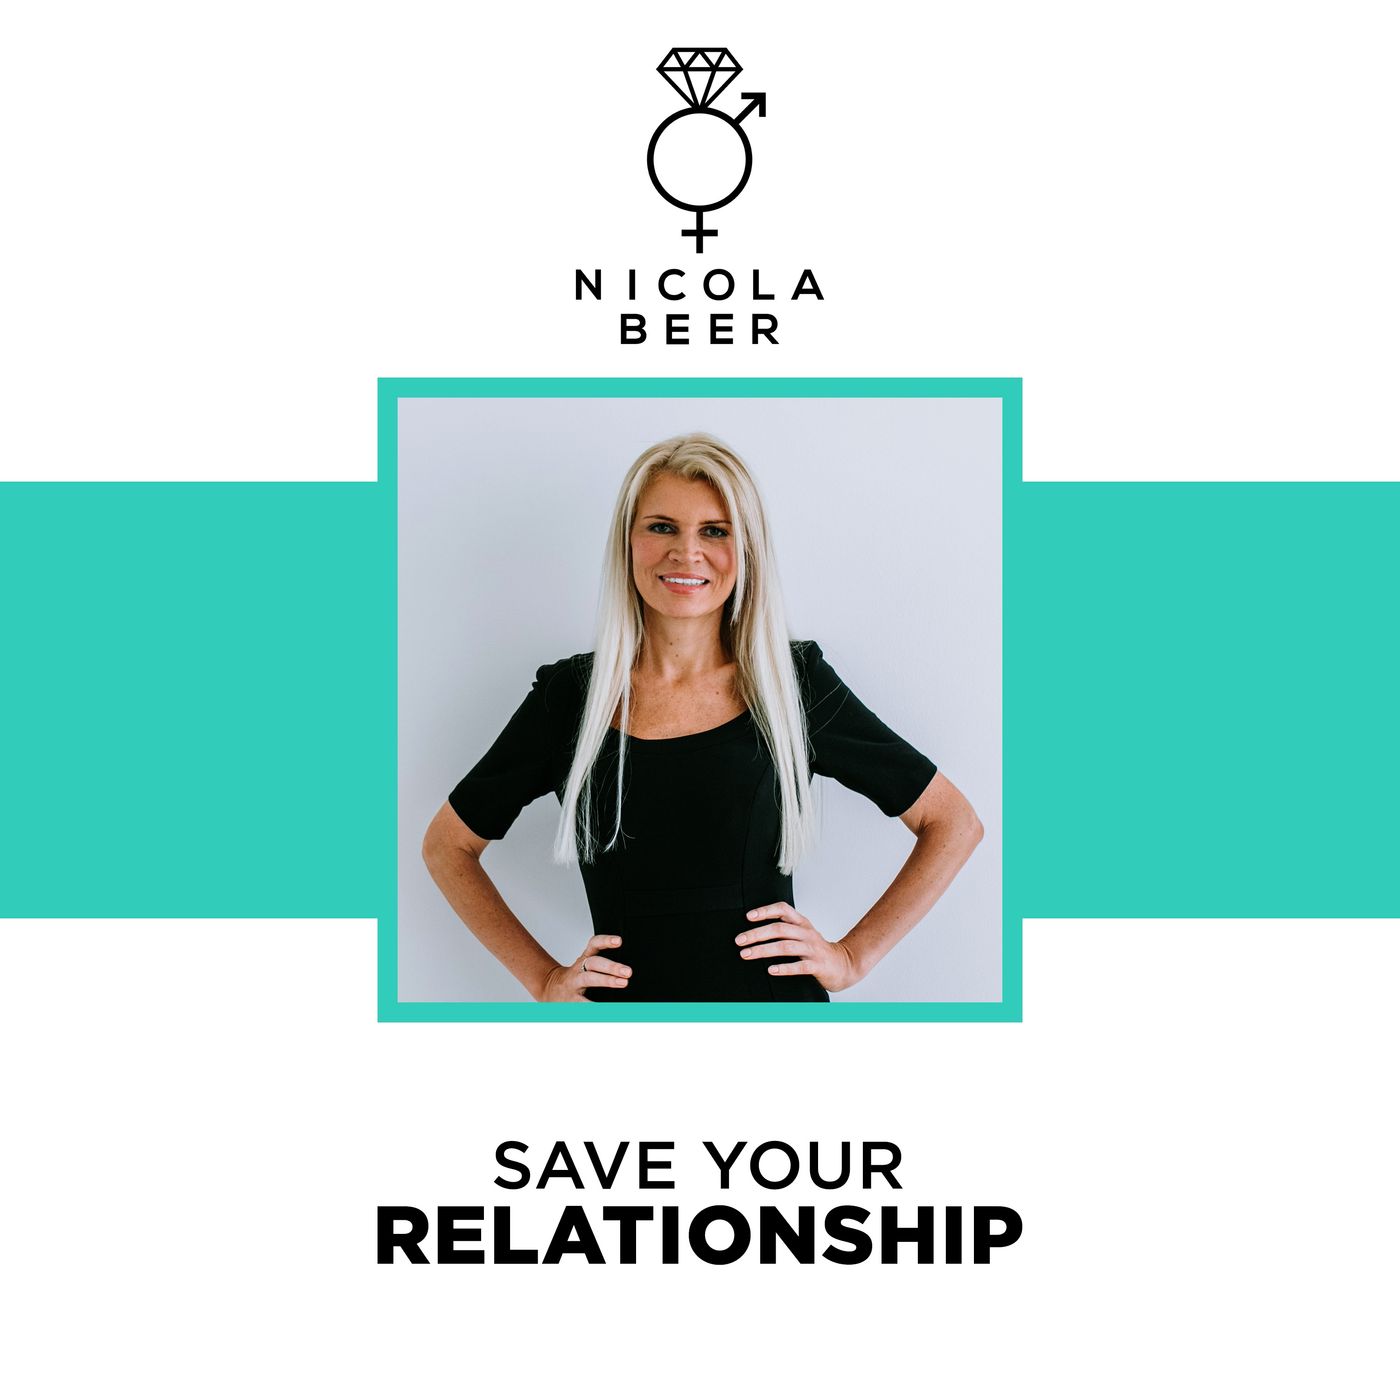 Save Your Marriage – The Relationship Podcast with Nicola Beer